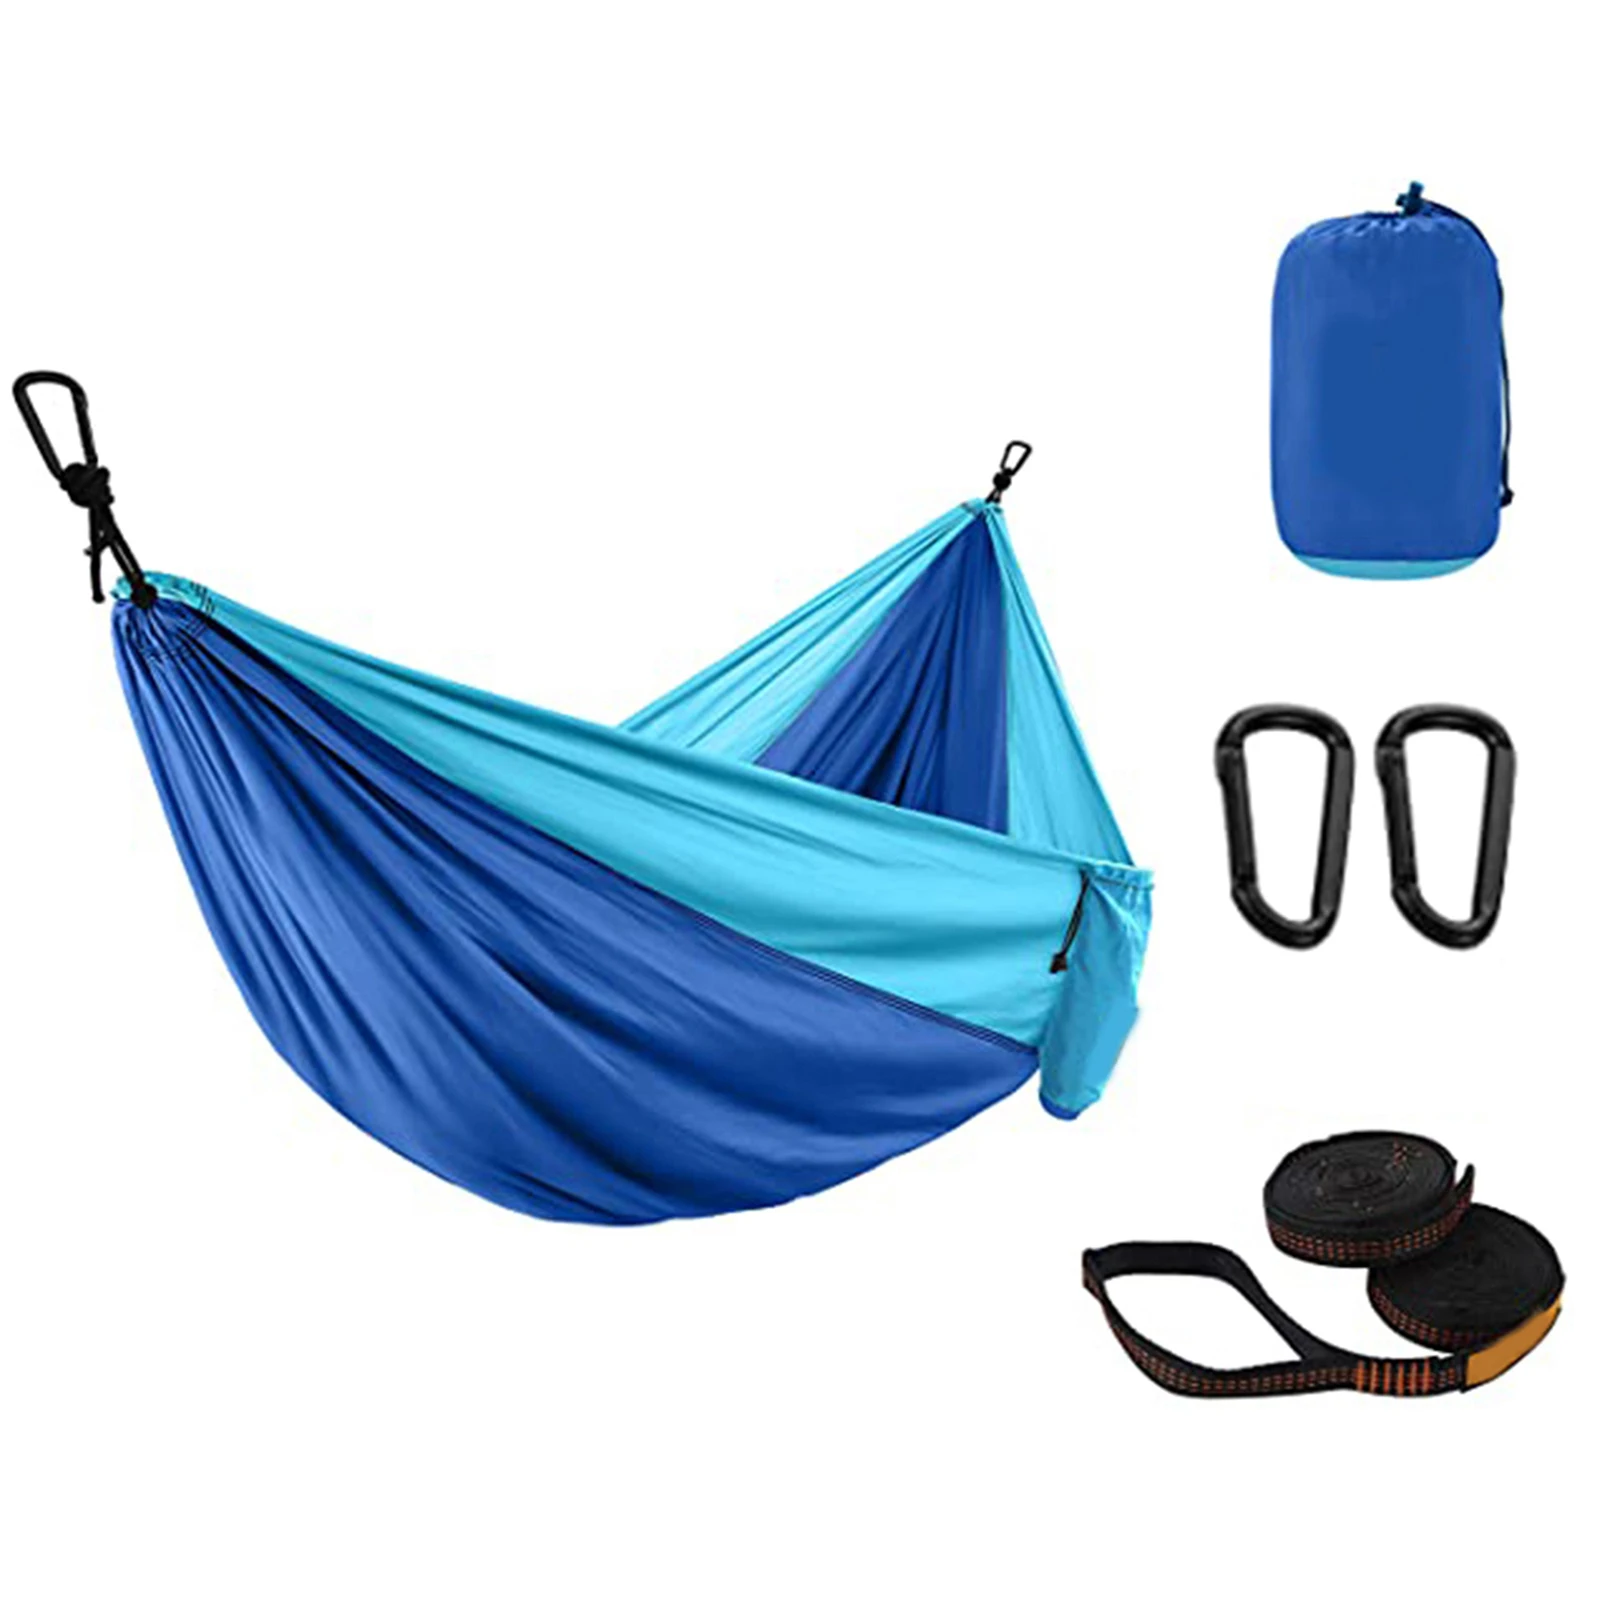 

New Hot Outdoor Camping Hammock with Sturdy Strap & Steel Carabiner Hammock for Fishing Lawn Garden